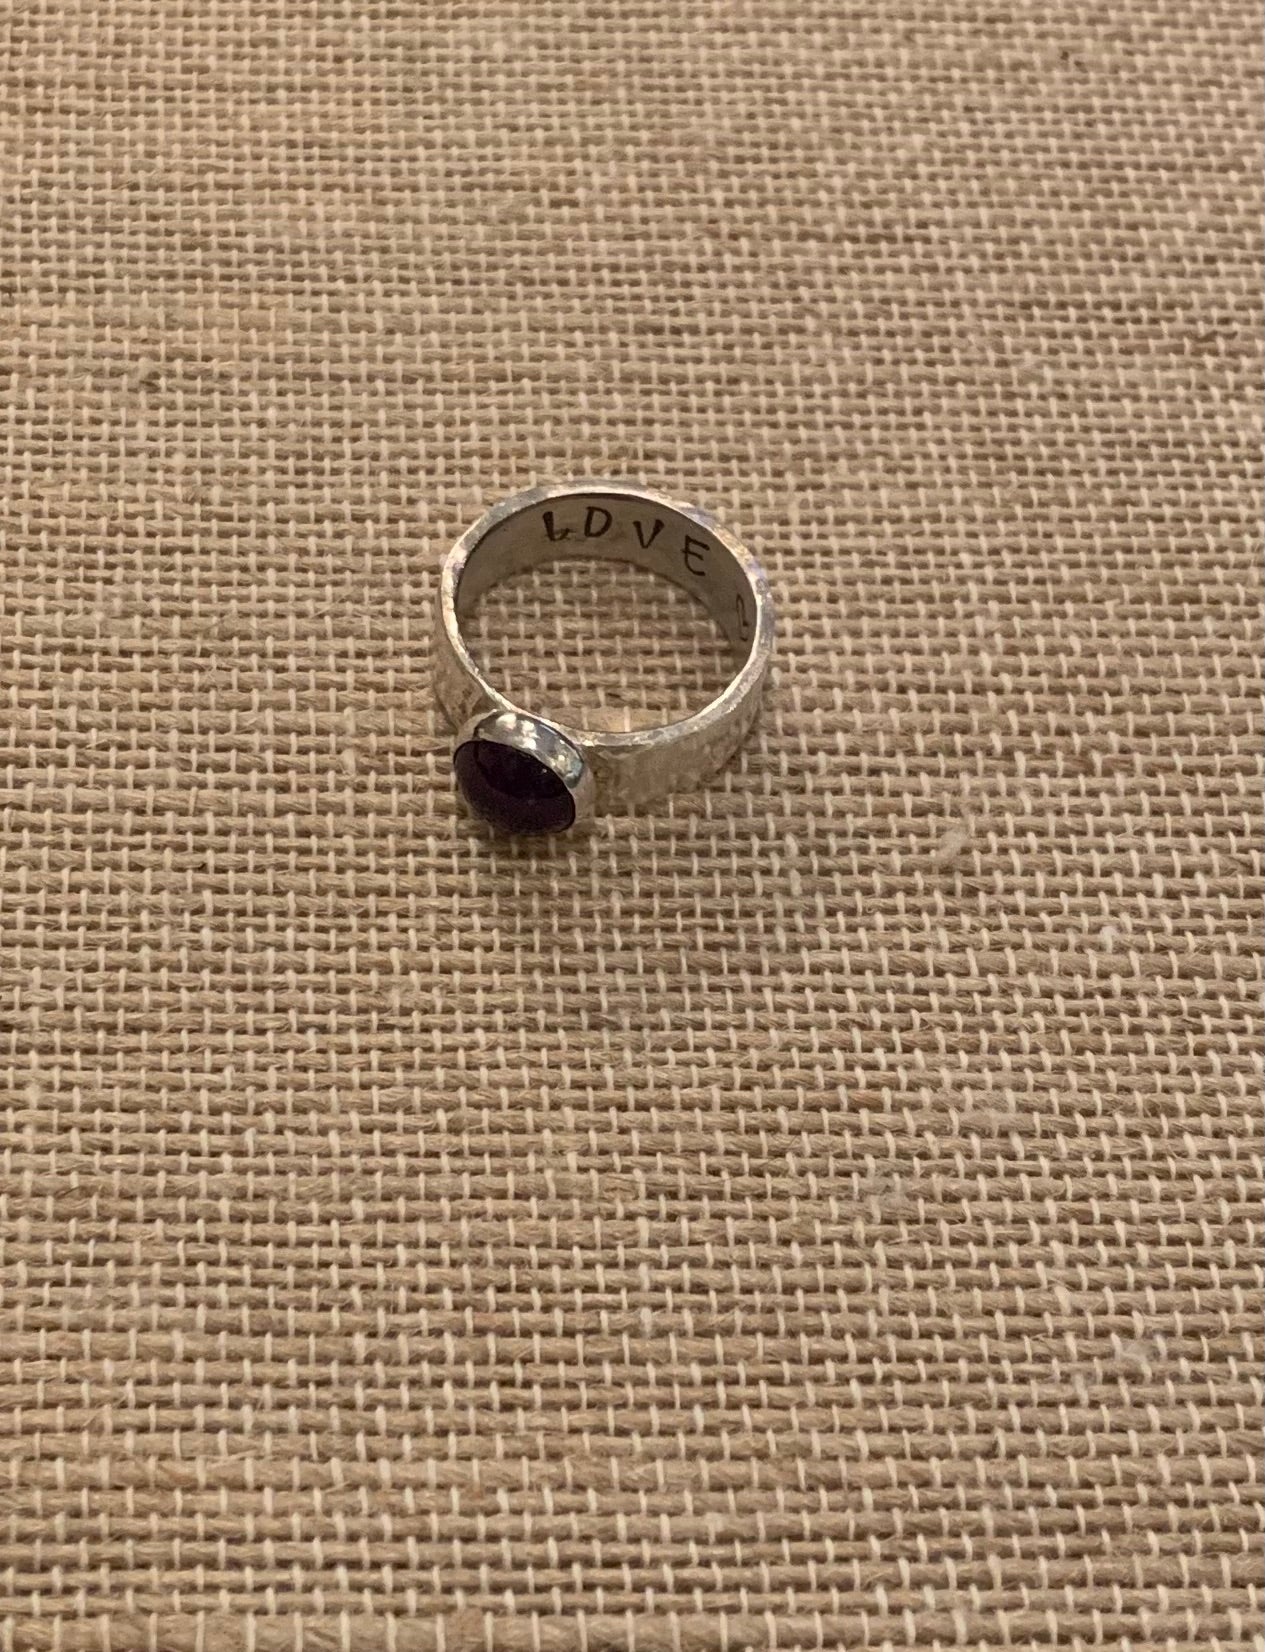 Amethyst Ring with “Love” inscription